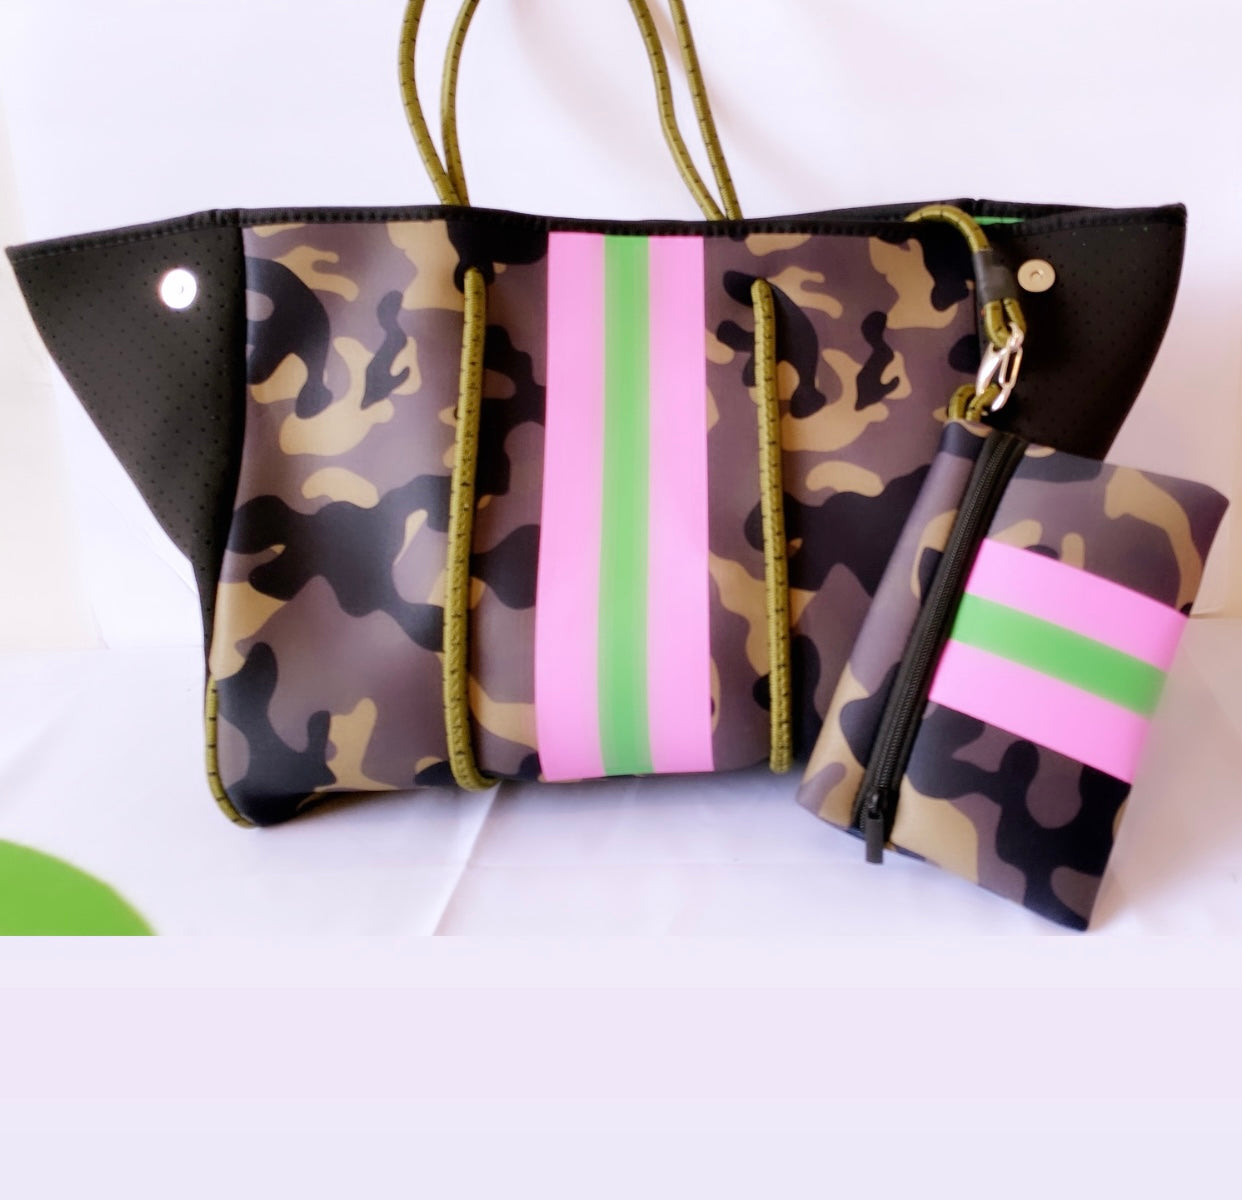  Crafters Cup Camo Neoprene Tote  Beach Tote, Gym Bag Matching  Wallet Included Green with Pink & Orange Stripes, Dark Green, Light Green,  Dark Pink, Light Pink, Black, Bight Pink, Gray